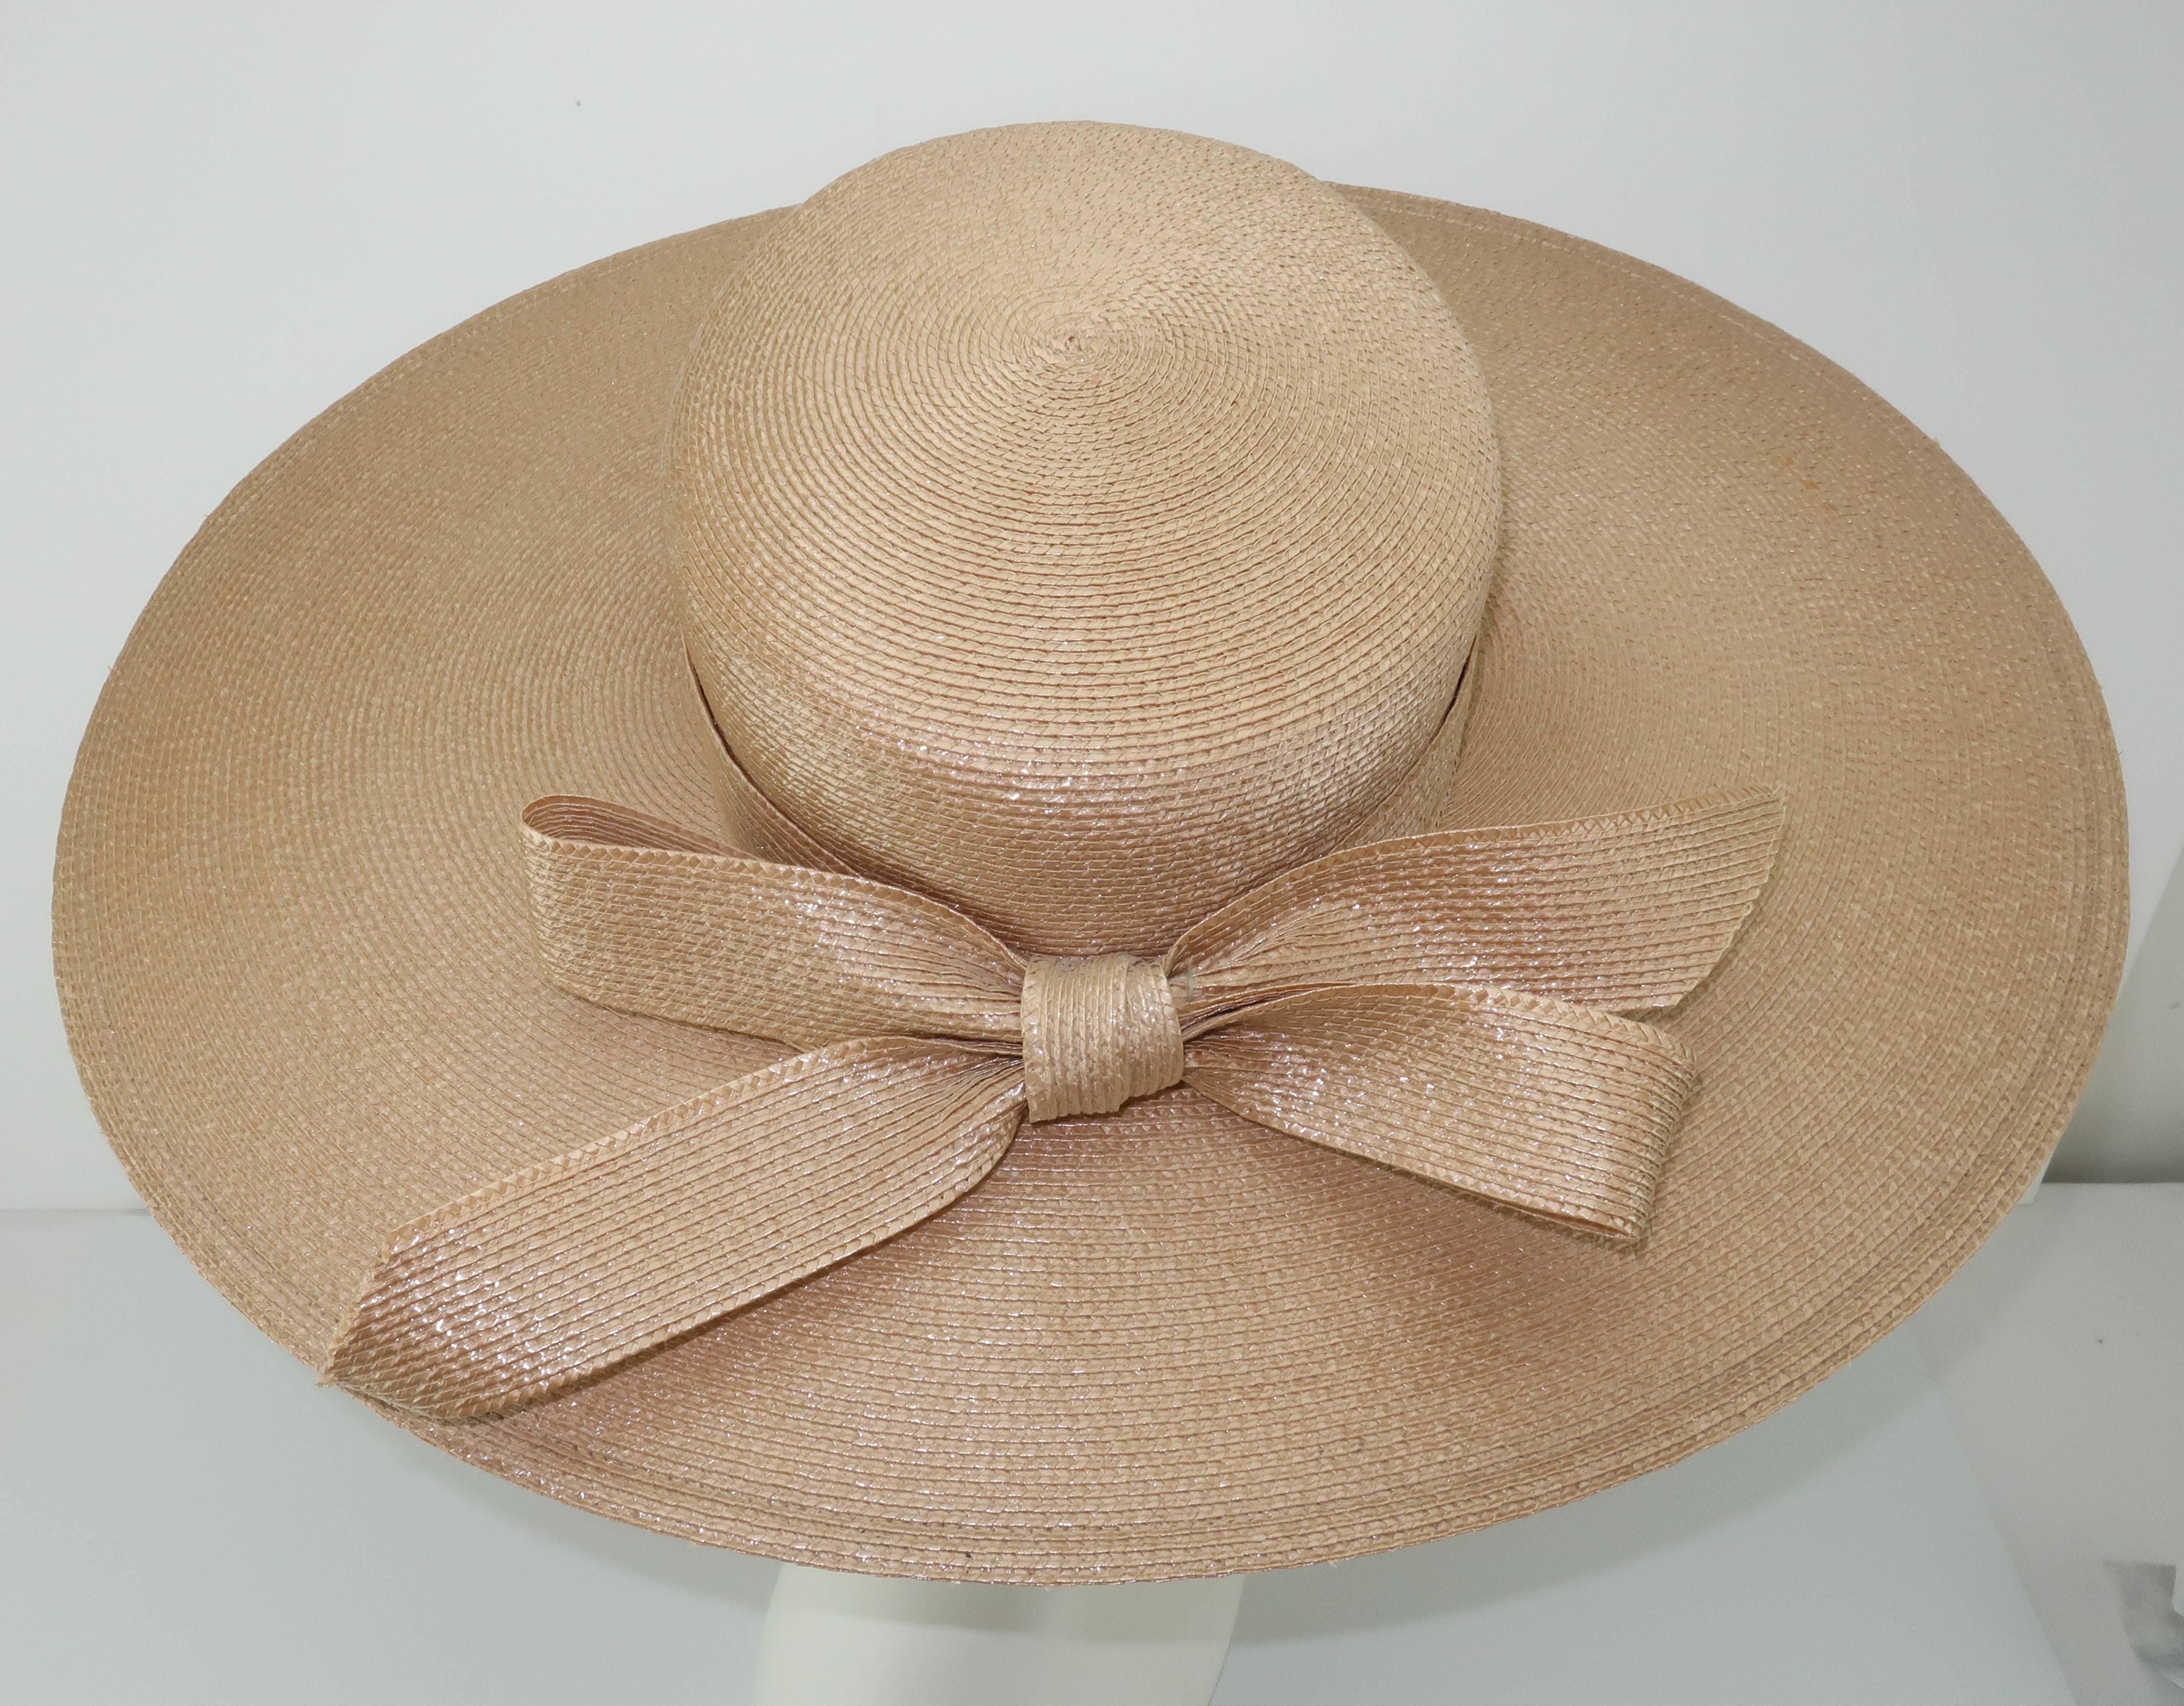 This Frank Olive straw hat for Saks Fifth Avenue has a classic wide brimmed silhouette with a subtly unique oval design reminiscent of 1920's styles.  The flesh tone straw has a coating which creates an understated shimmer providing a formality to